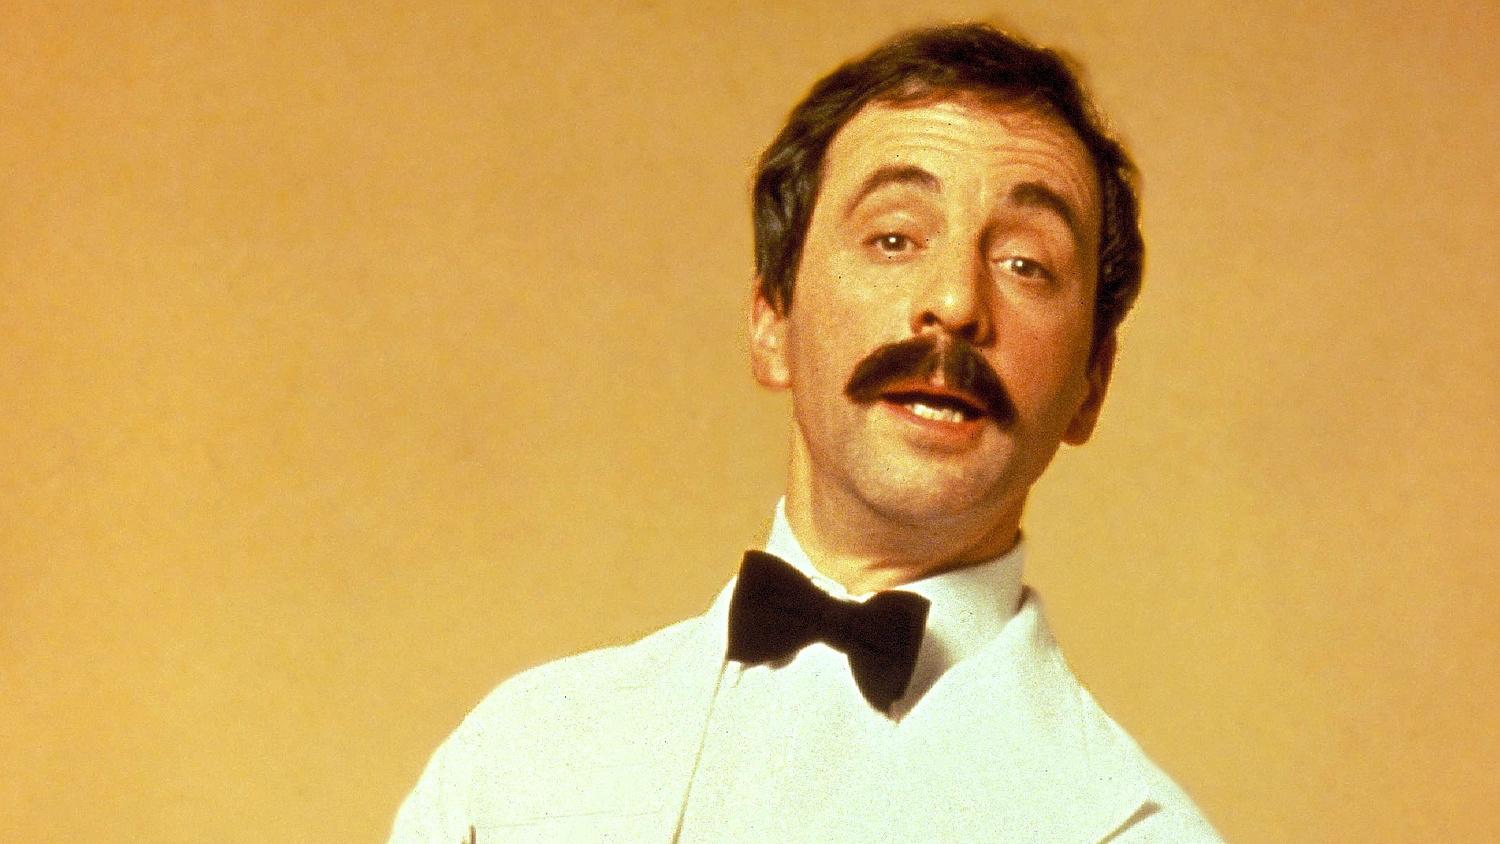 watch fawlty towers free.